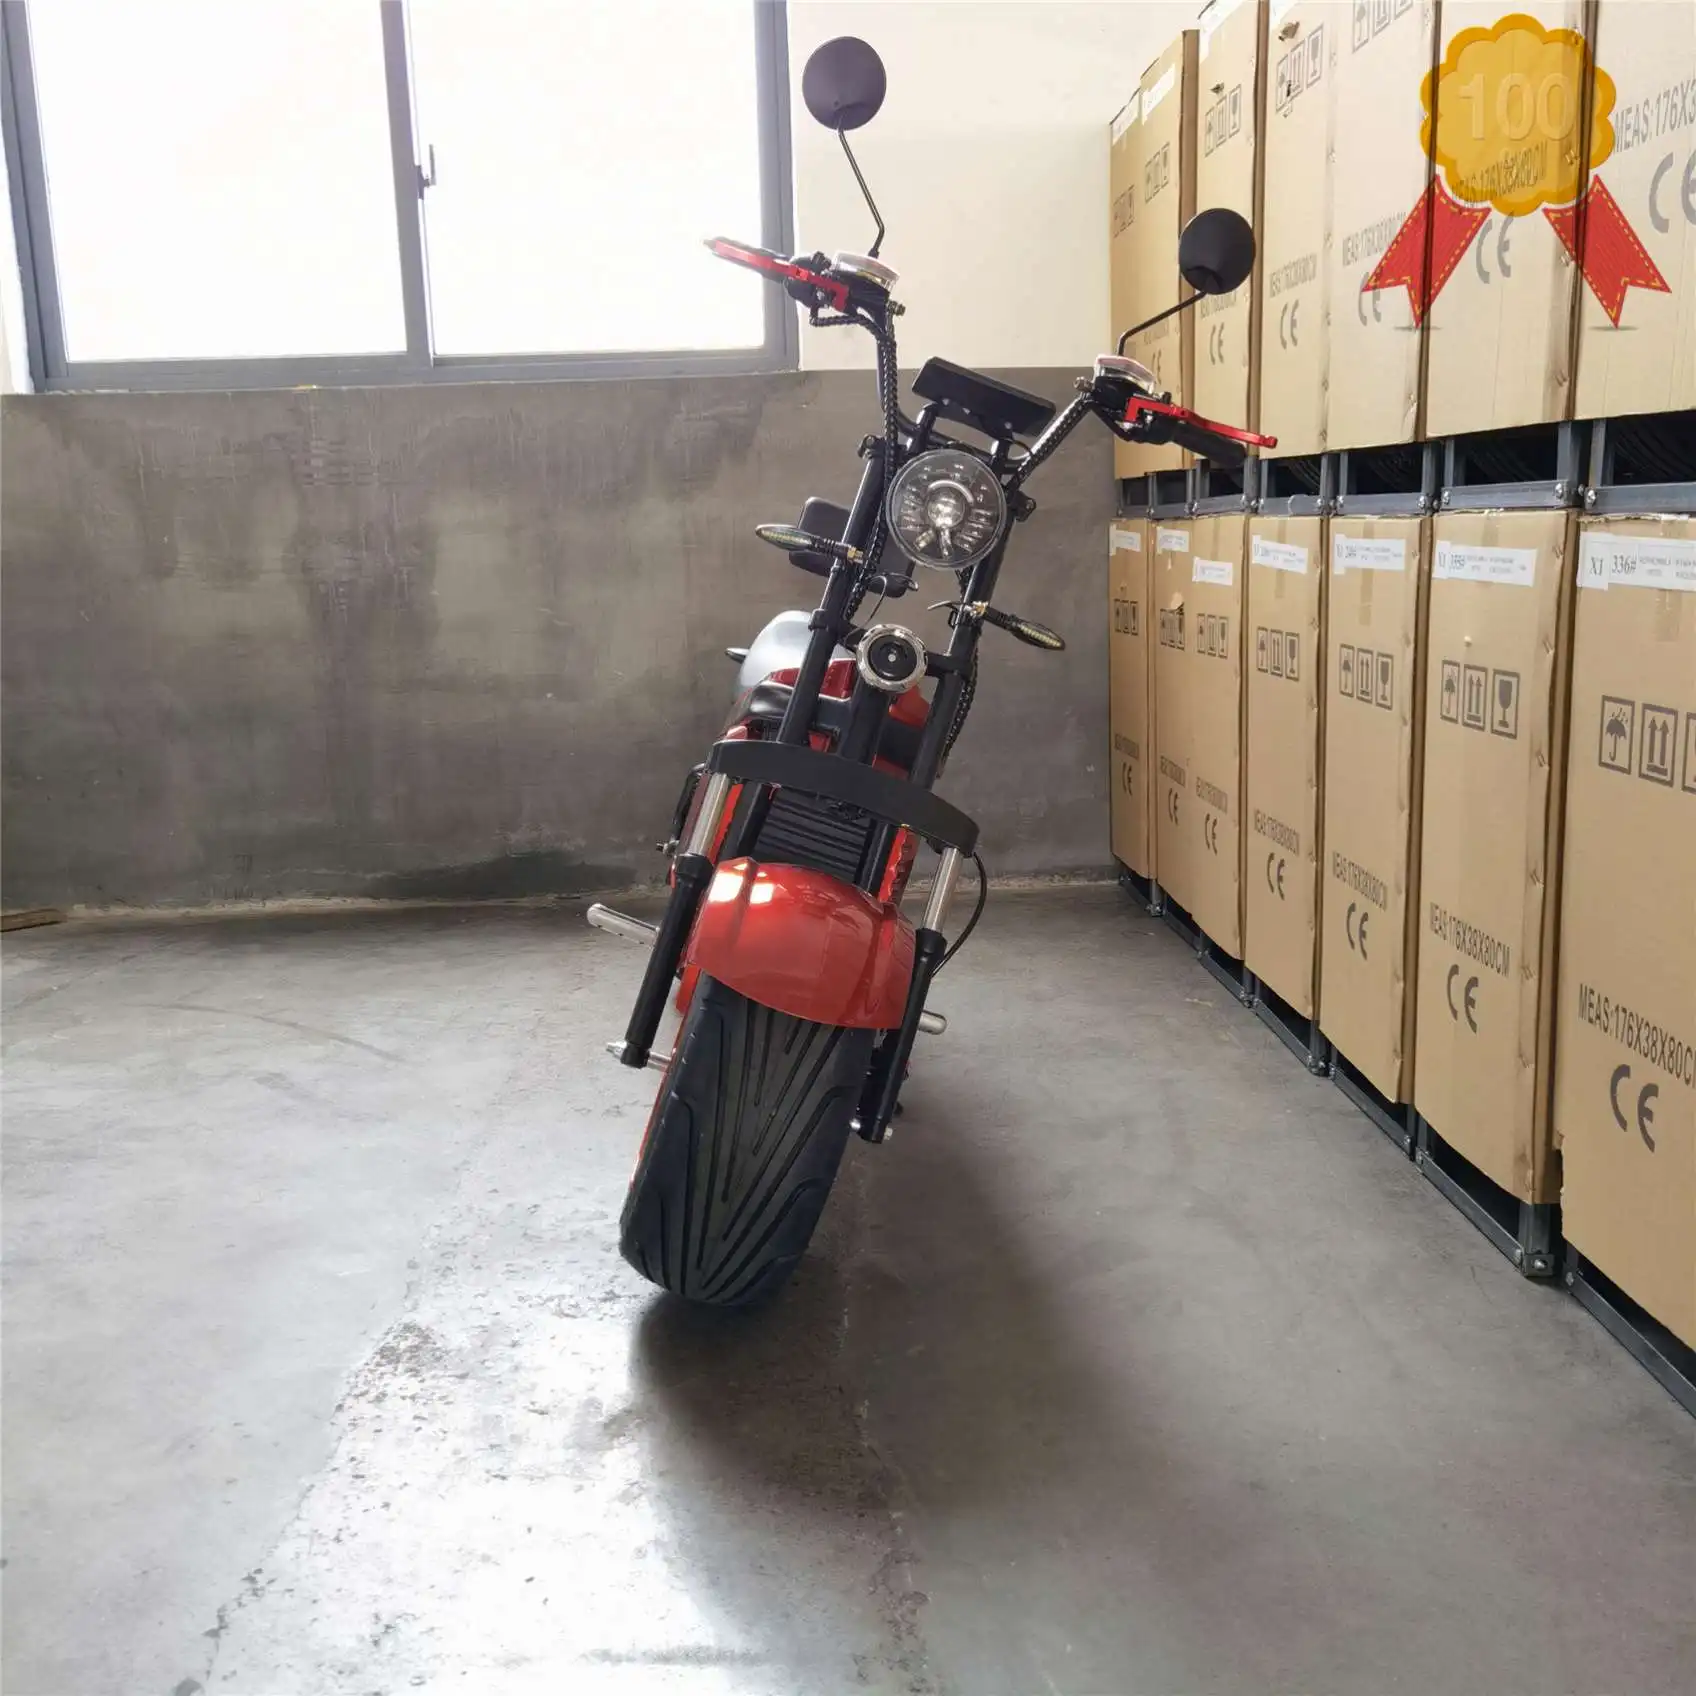 

European Warehouse YIDE Foldable 2 Wheel Electric Scooter 60V 12AH 20AH 2000W Fat Tire City Coco Motor Citycoco Electric Scoote